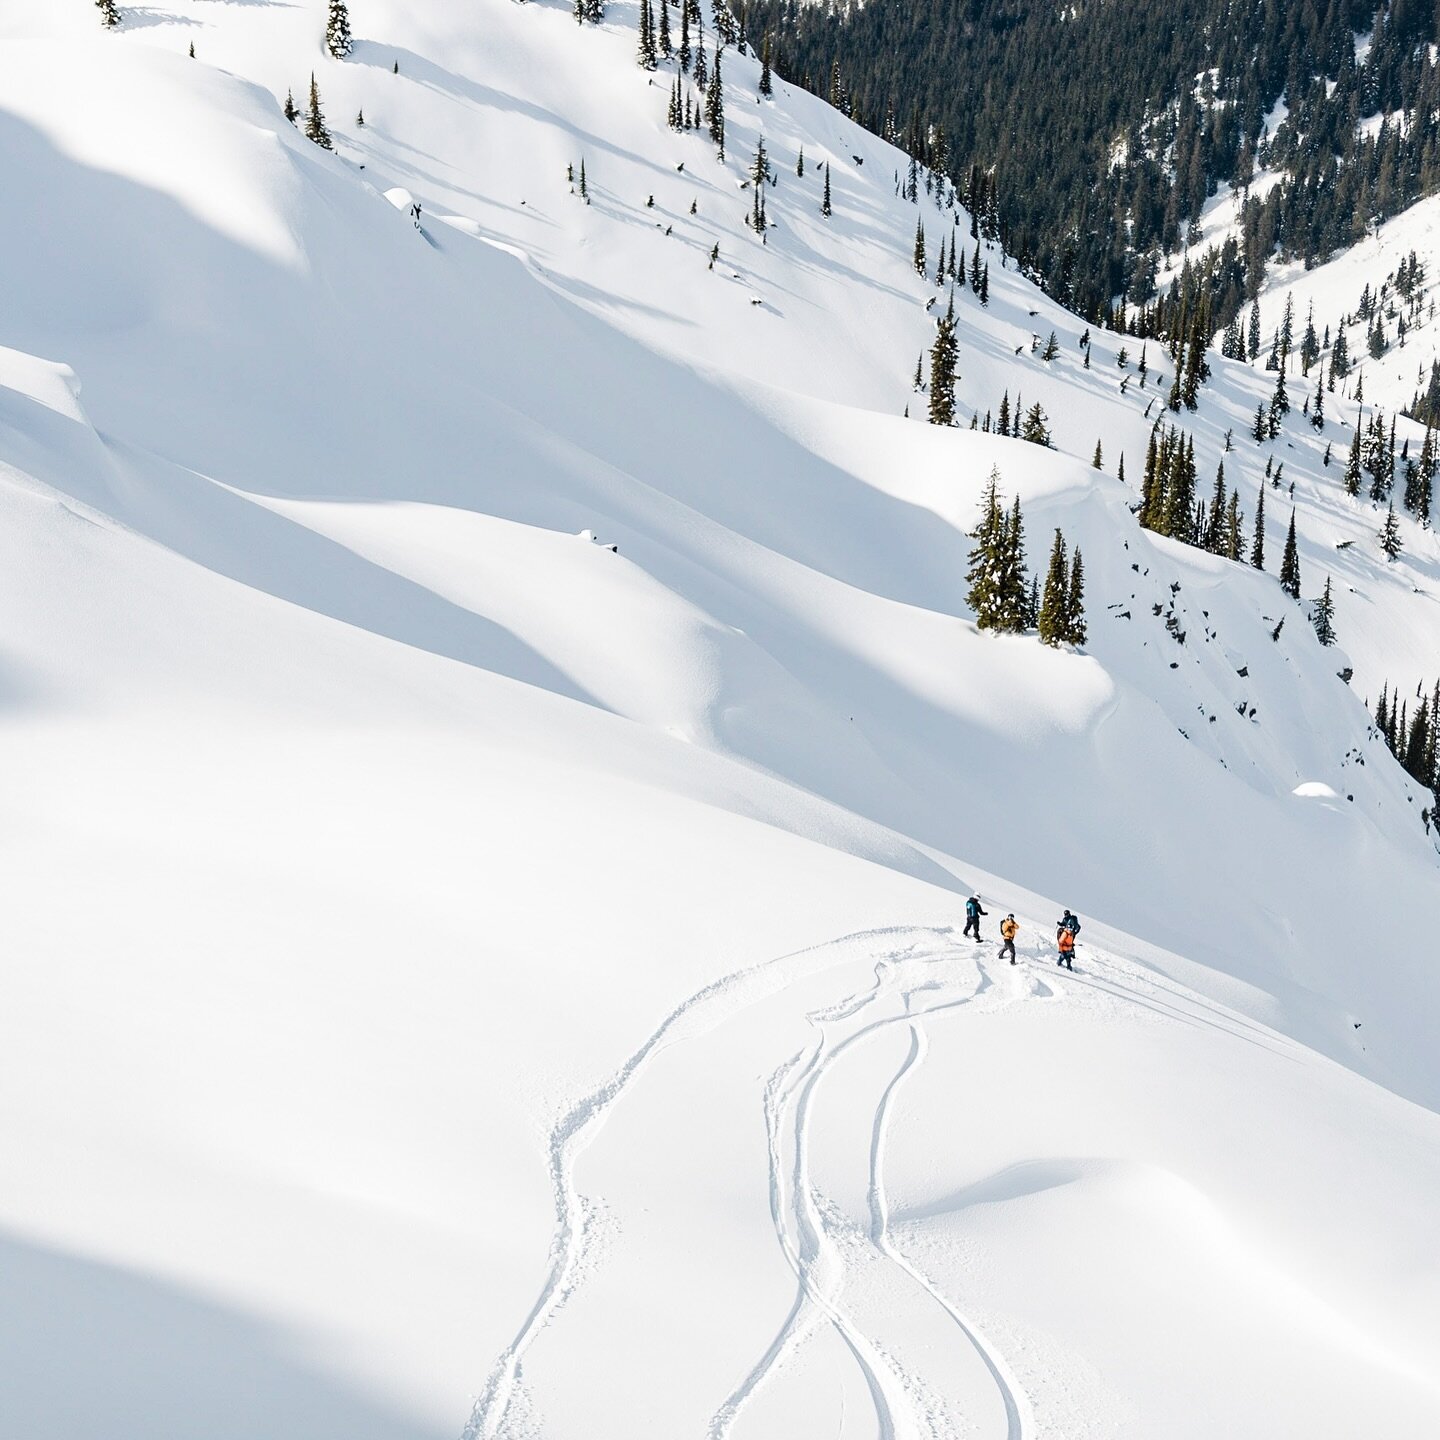 Seeking ski friends: there&rsquo;s still a lot of winter left to explore. If you&rsquo;re available in Revelstoke on any dates in February to ski and take photos with me please send me a DM!